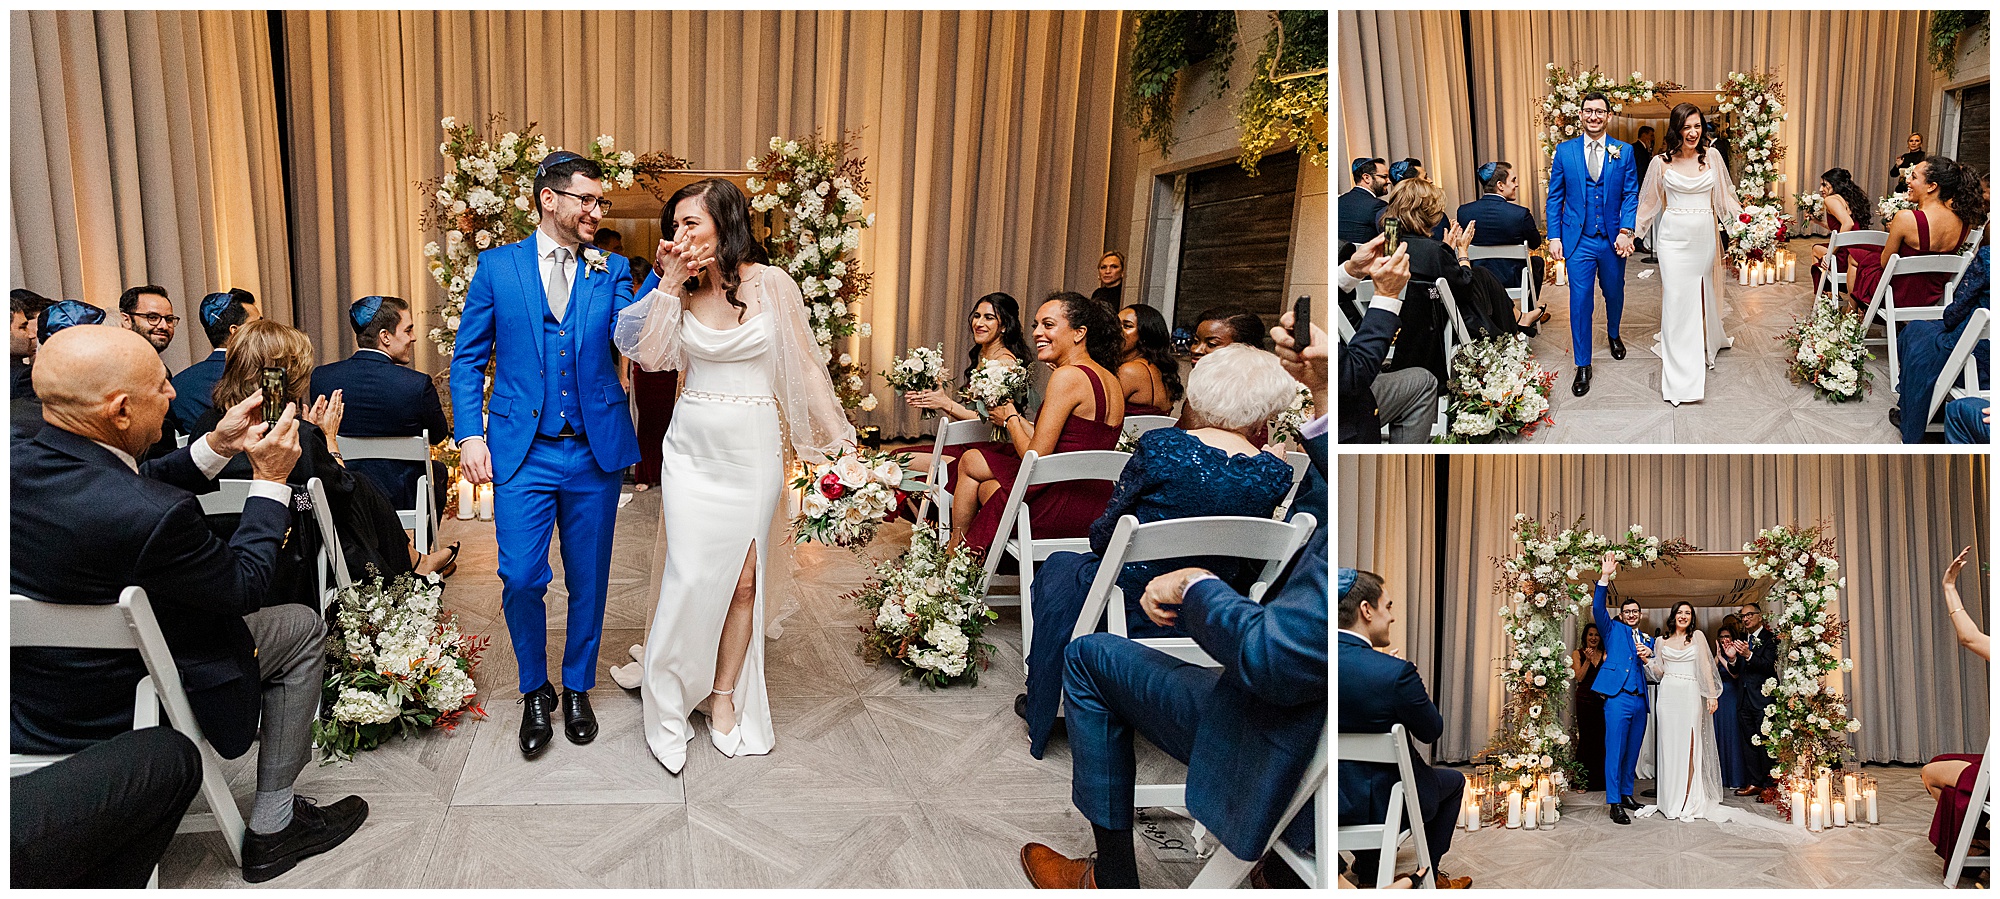 Charming winter wedding at the ravel hotel